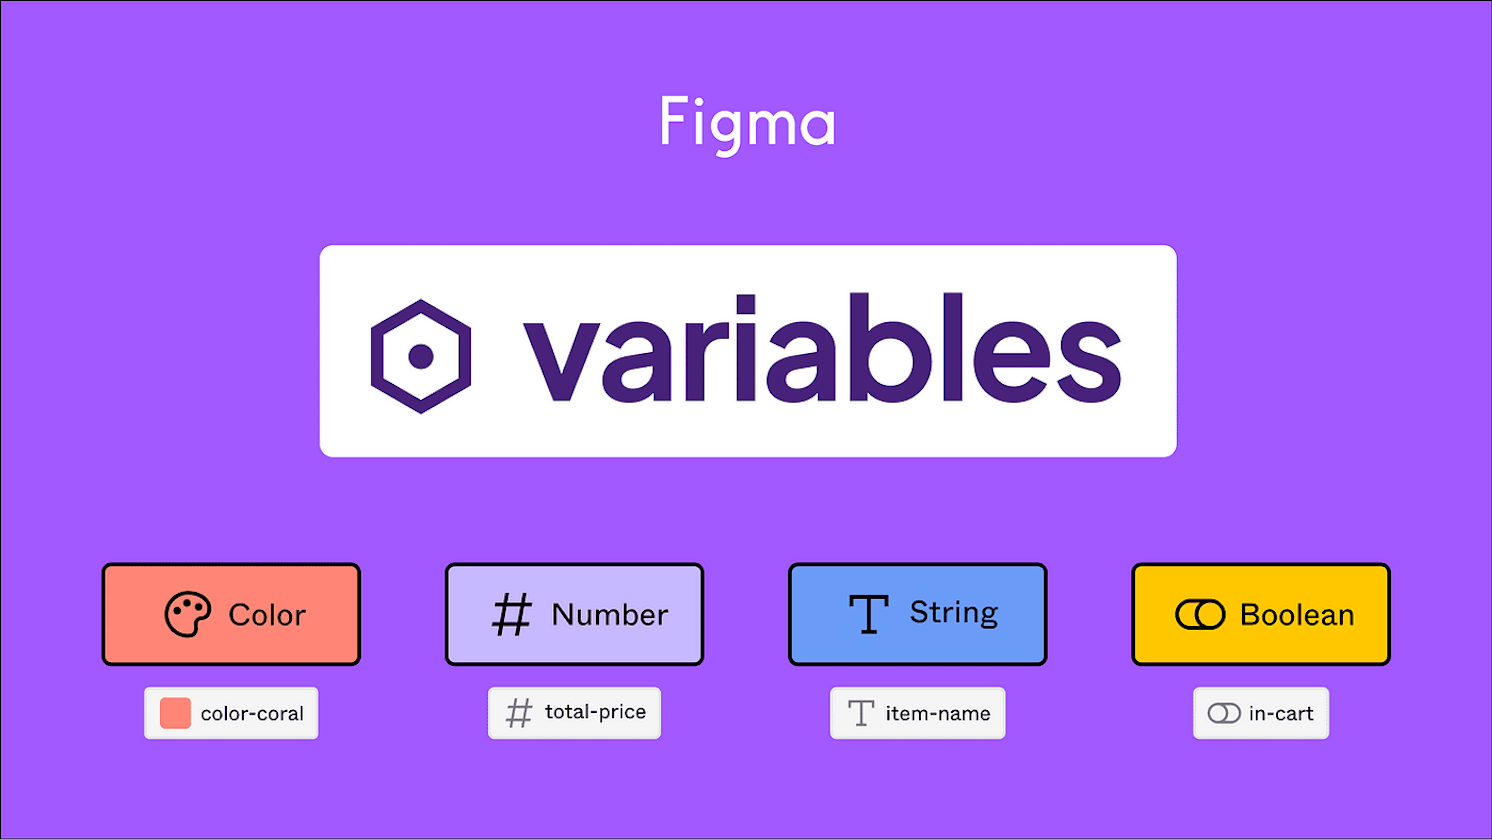 How to Use Variables in Figma